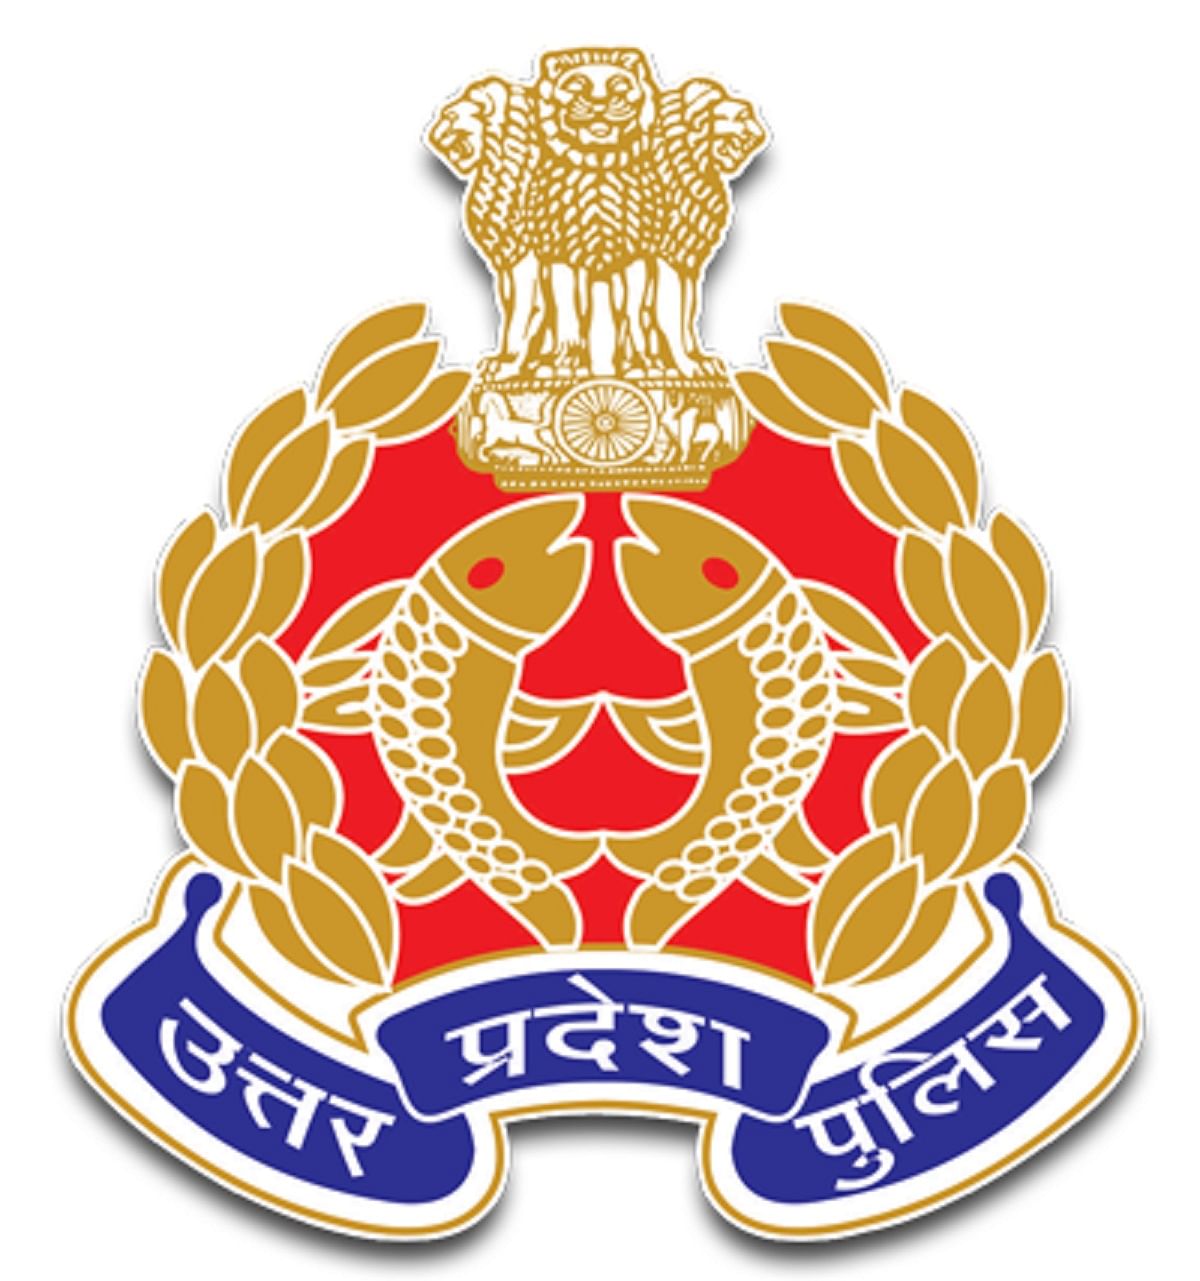 UP Police SI Recruitment 2021: Application Last Date for 9534 Posts Extended, Graduates can Apply